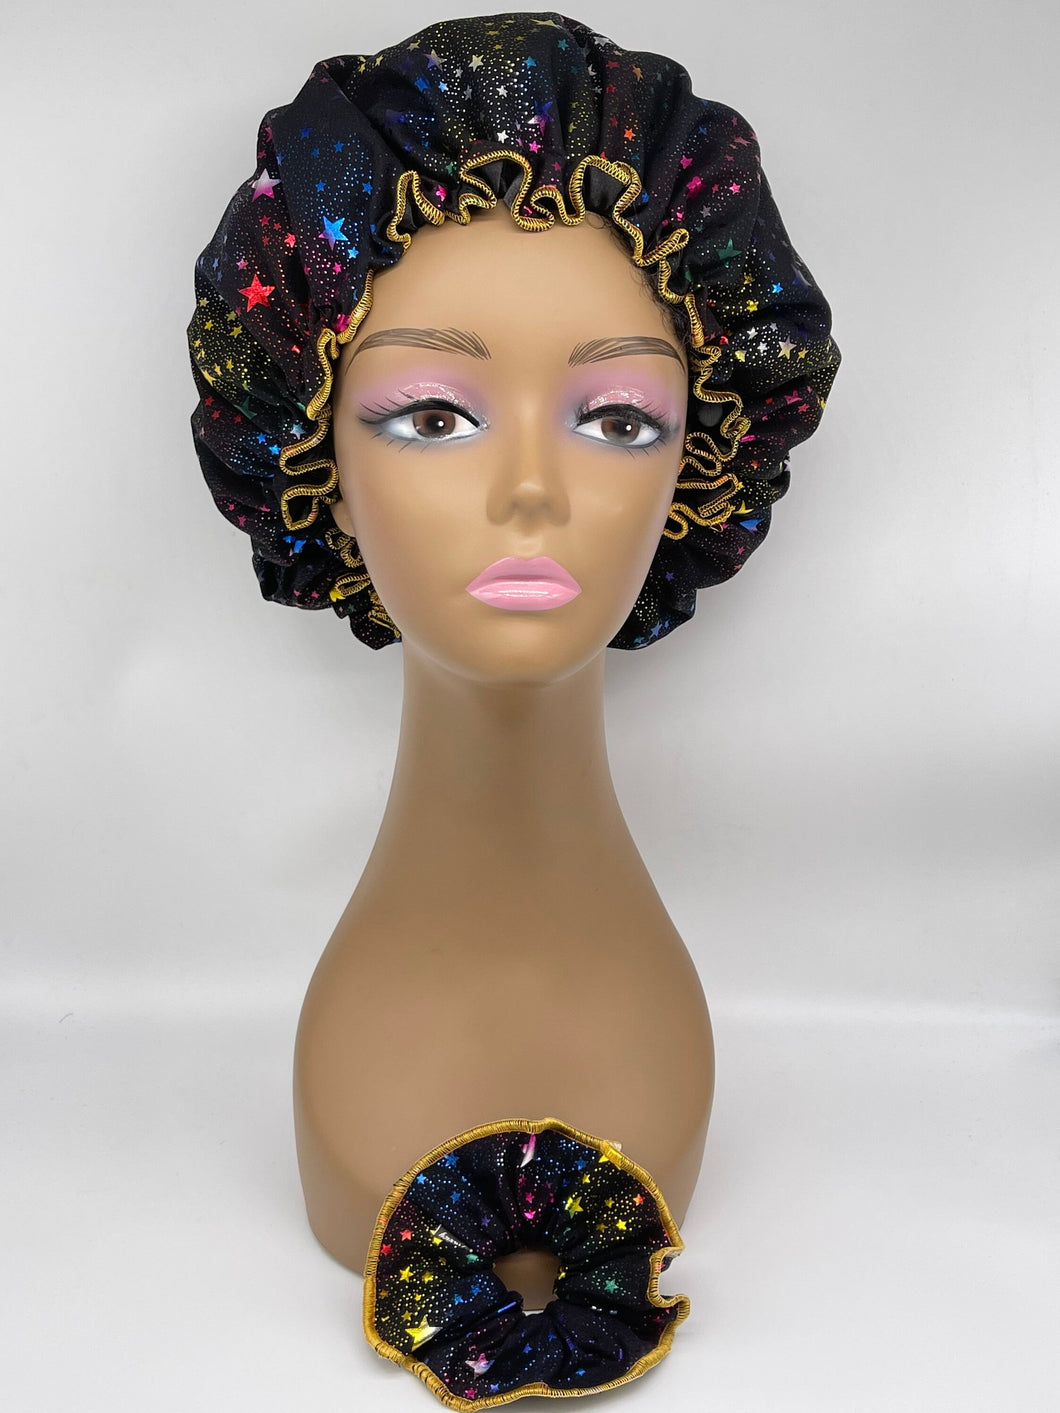 Bonnet for healthy hair care, Rainbow Stars bonnet with satin lining, reversible ruffle bonnet and scrunchies to match